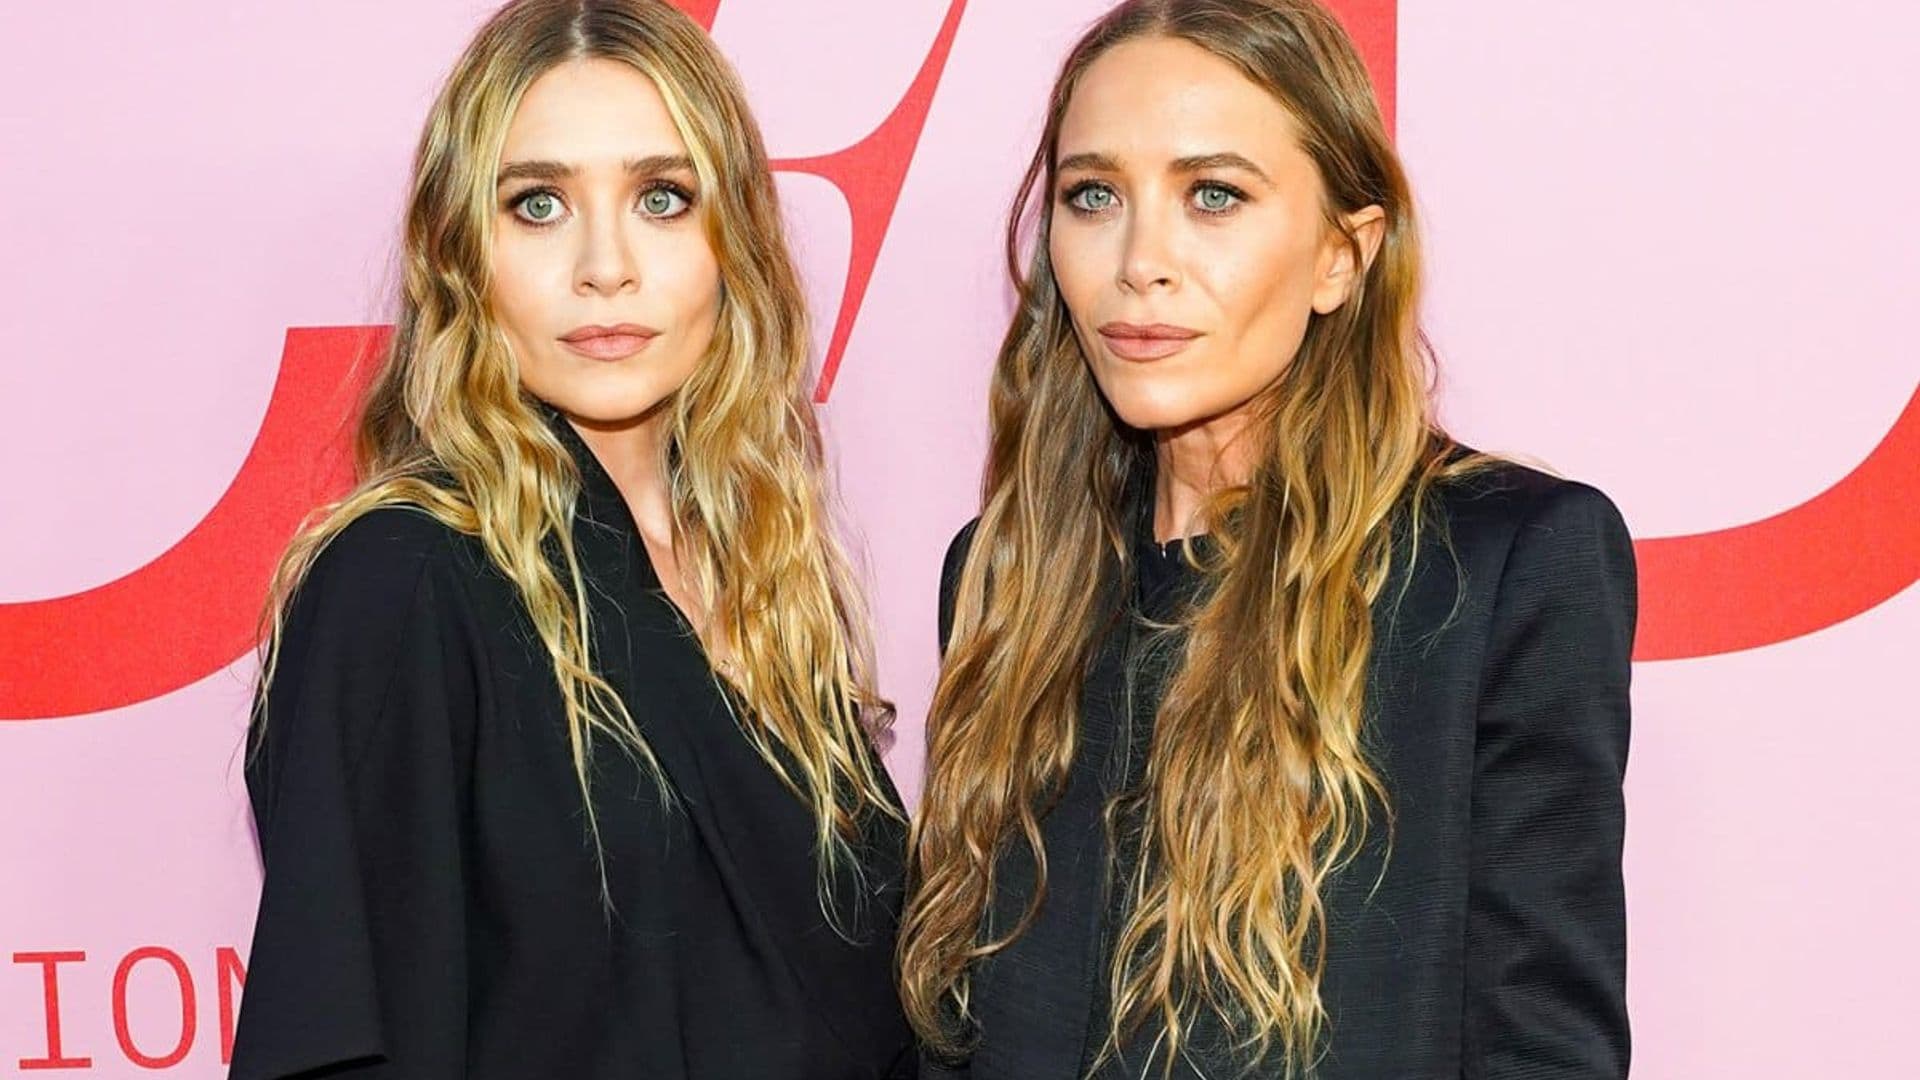 Mary-Kate and Ashley Olsen call themselves ‘discreet’ and ‘perfectionists’ in rare interview